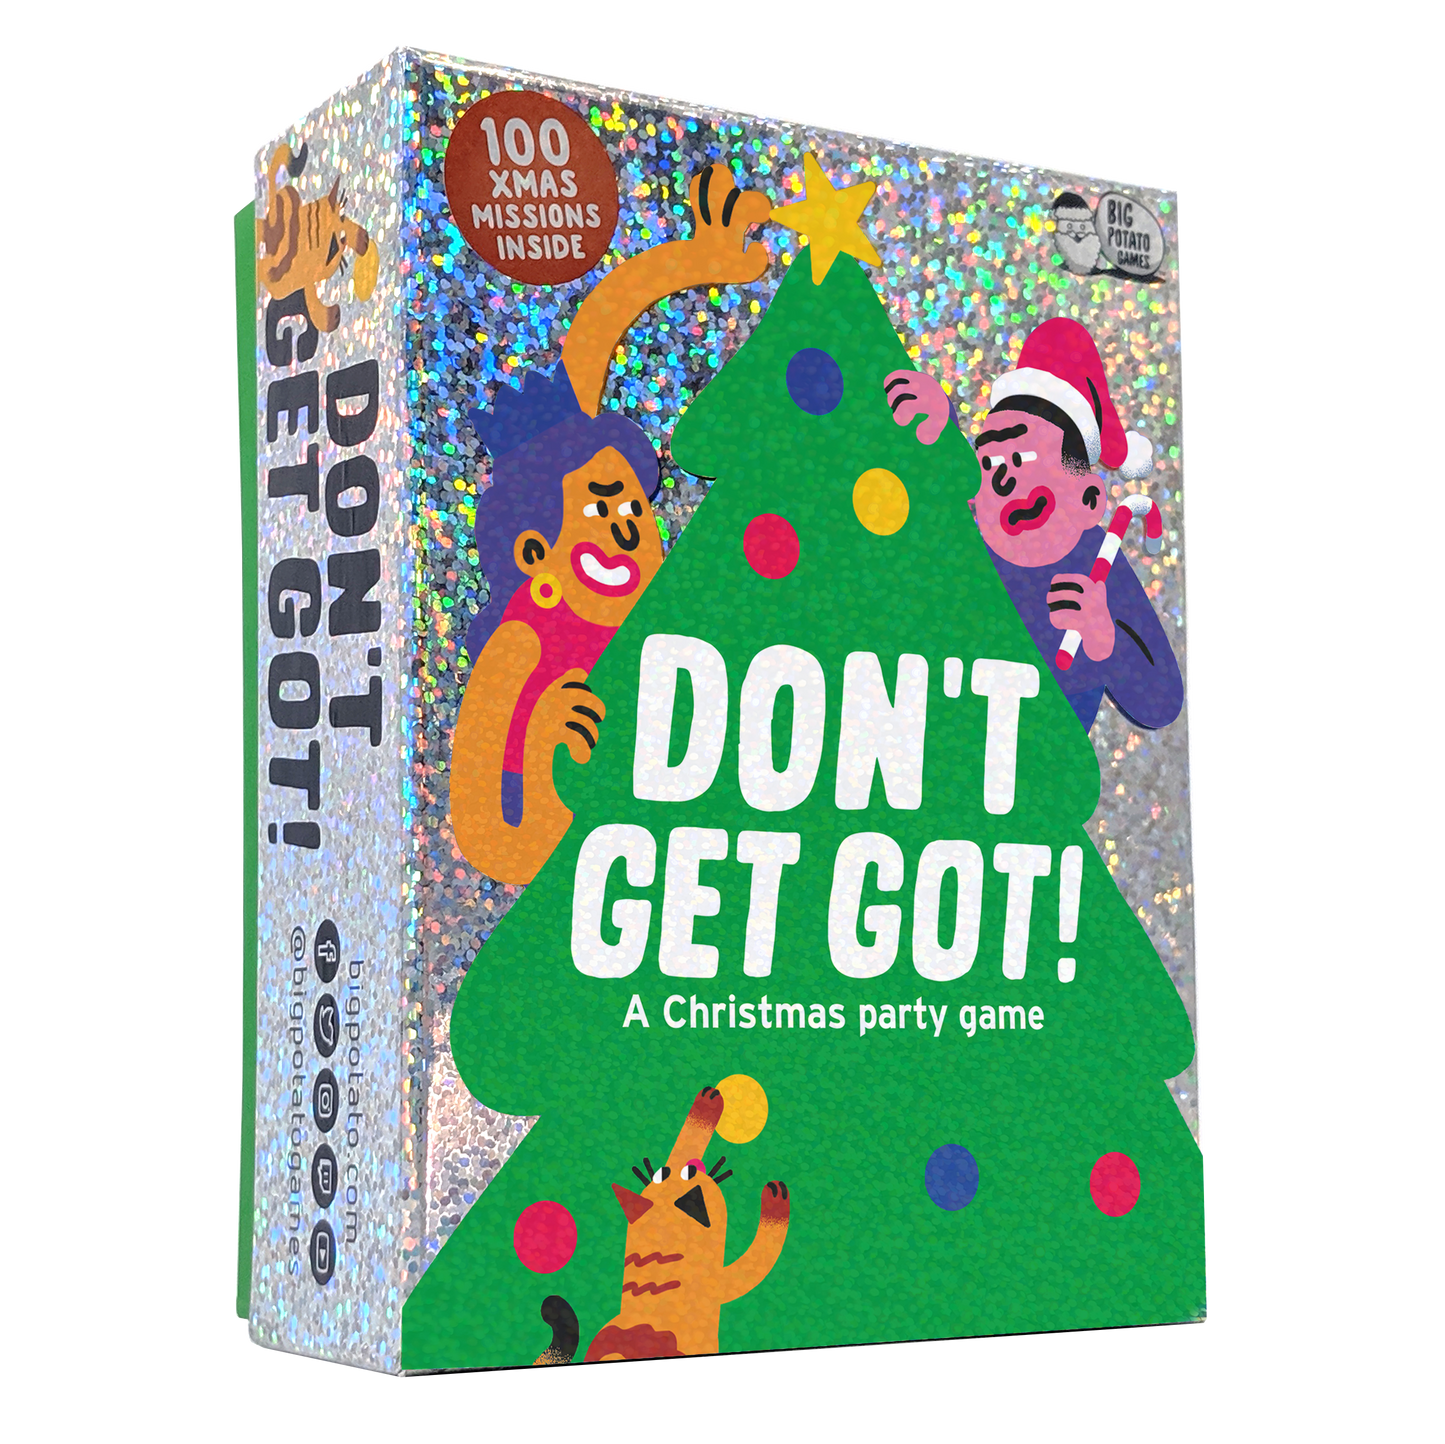 Dont get got Christms party game